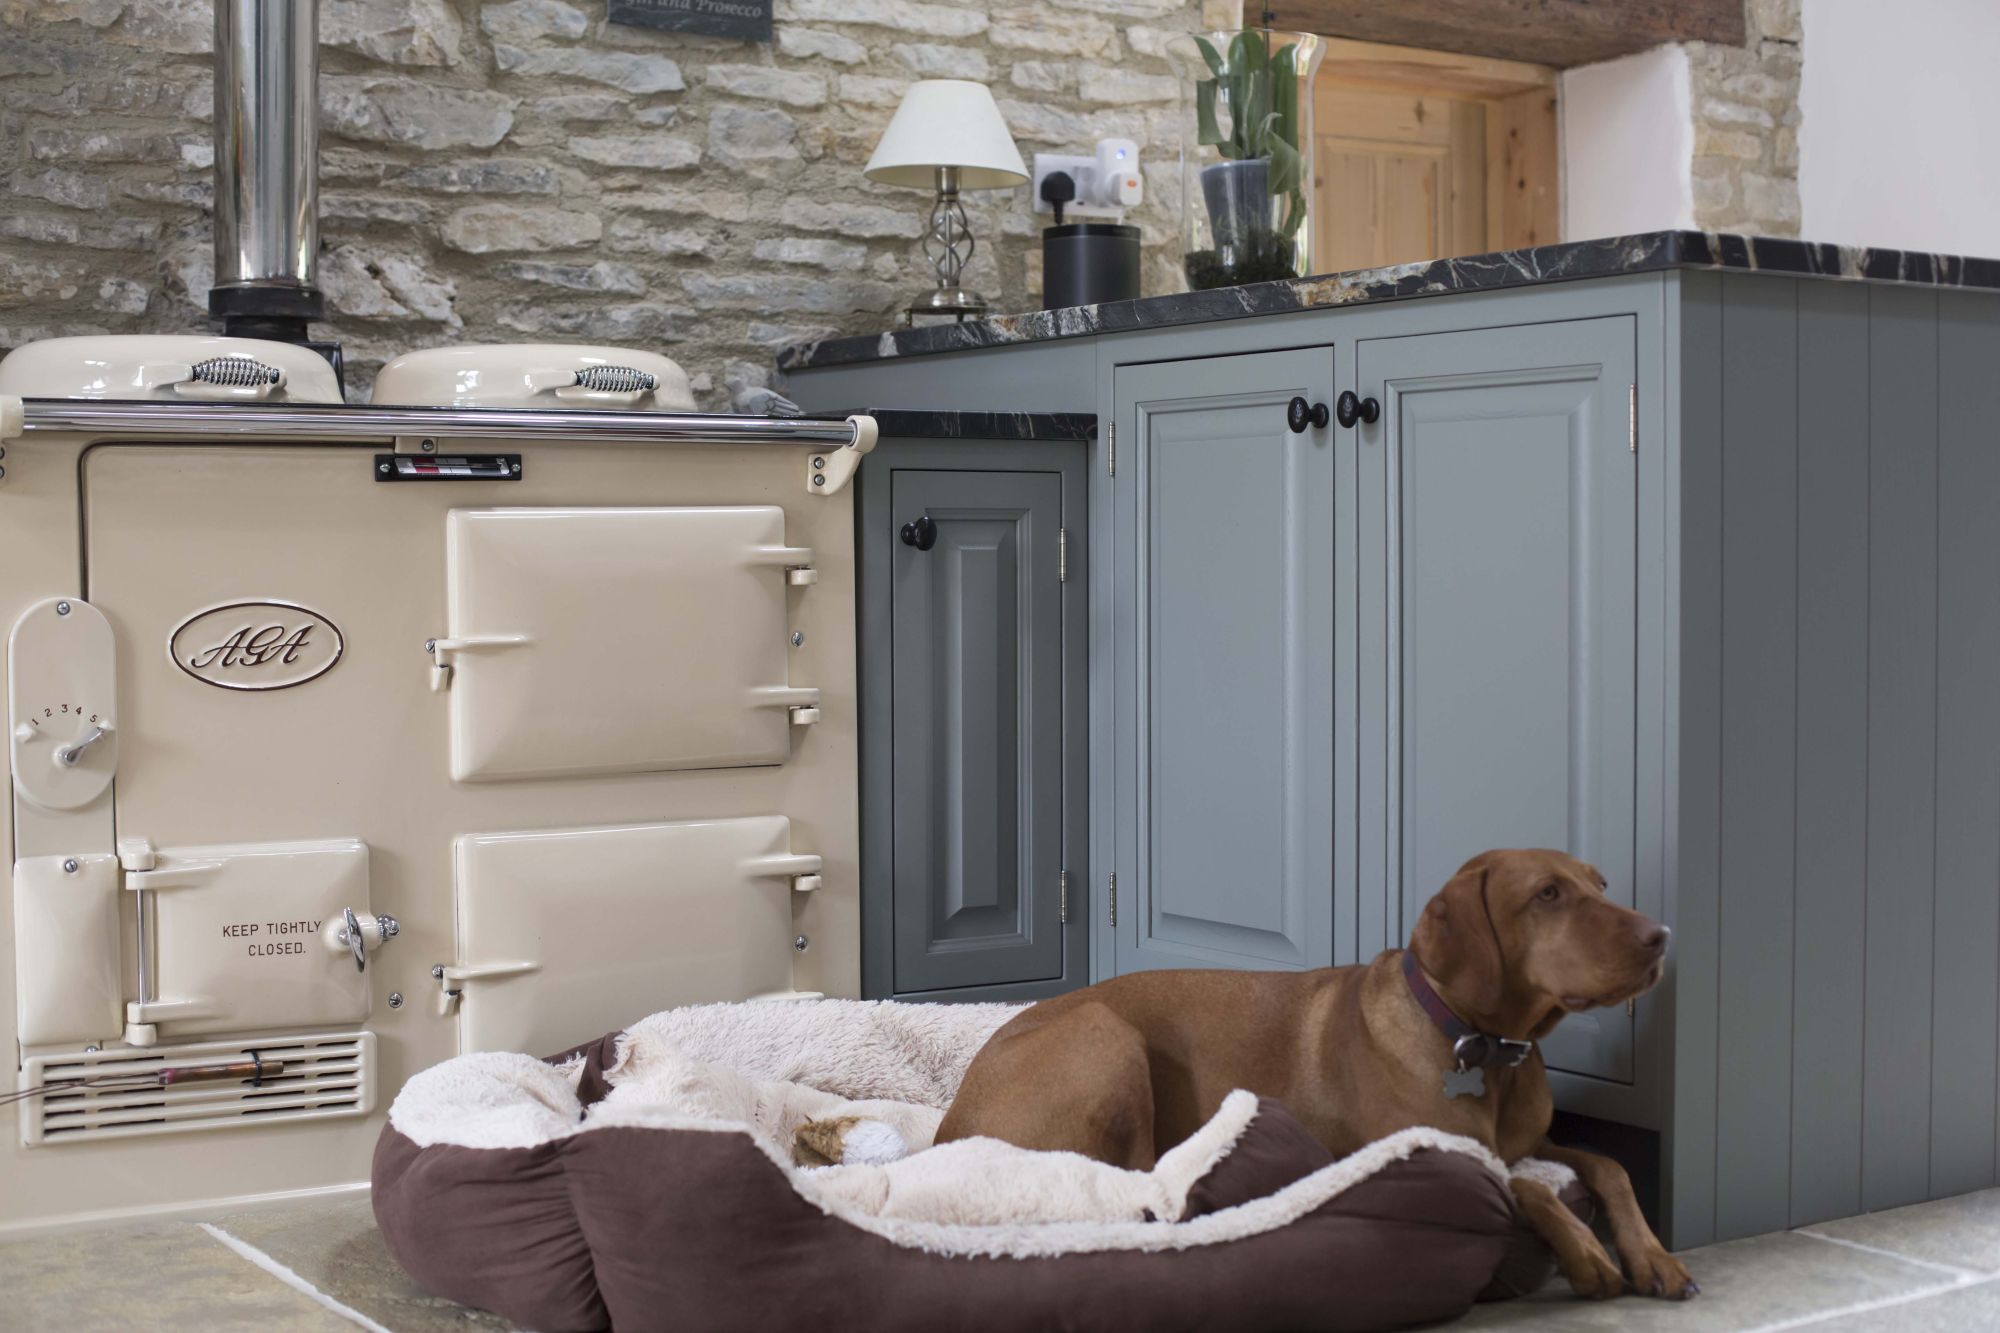 Ruby the dog beside the Aga in the fitted kitchen by Gardiner Haskins